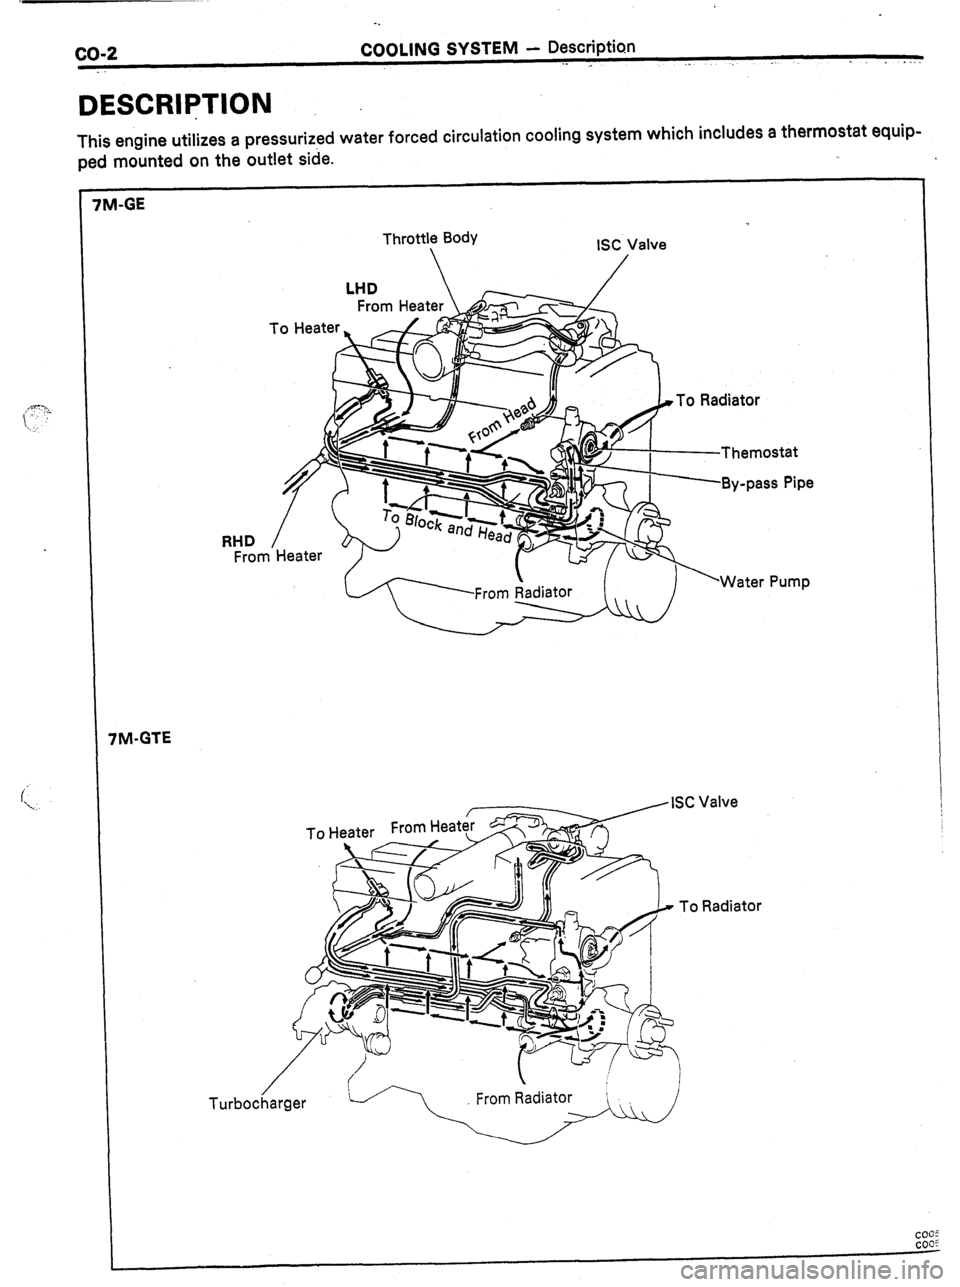 TOYOTA CELICA 1987  Service Repair Manual . . 
co-2 COOLING SYSTEM - Description 
,- I . . . 
DESCRlqTlON 
This engine utilizes a pressurized water forced circulation cooling system which includes a thermostat equip- 
ped mounted on the outle